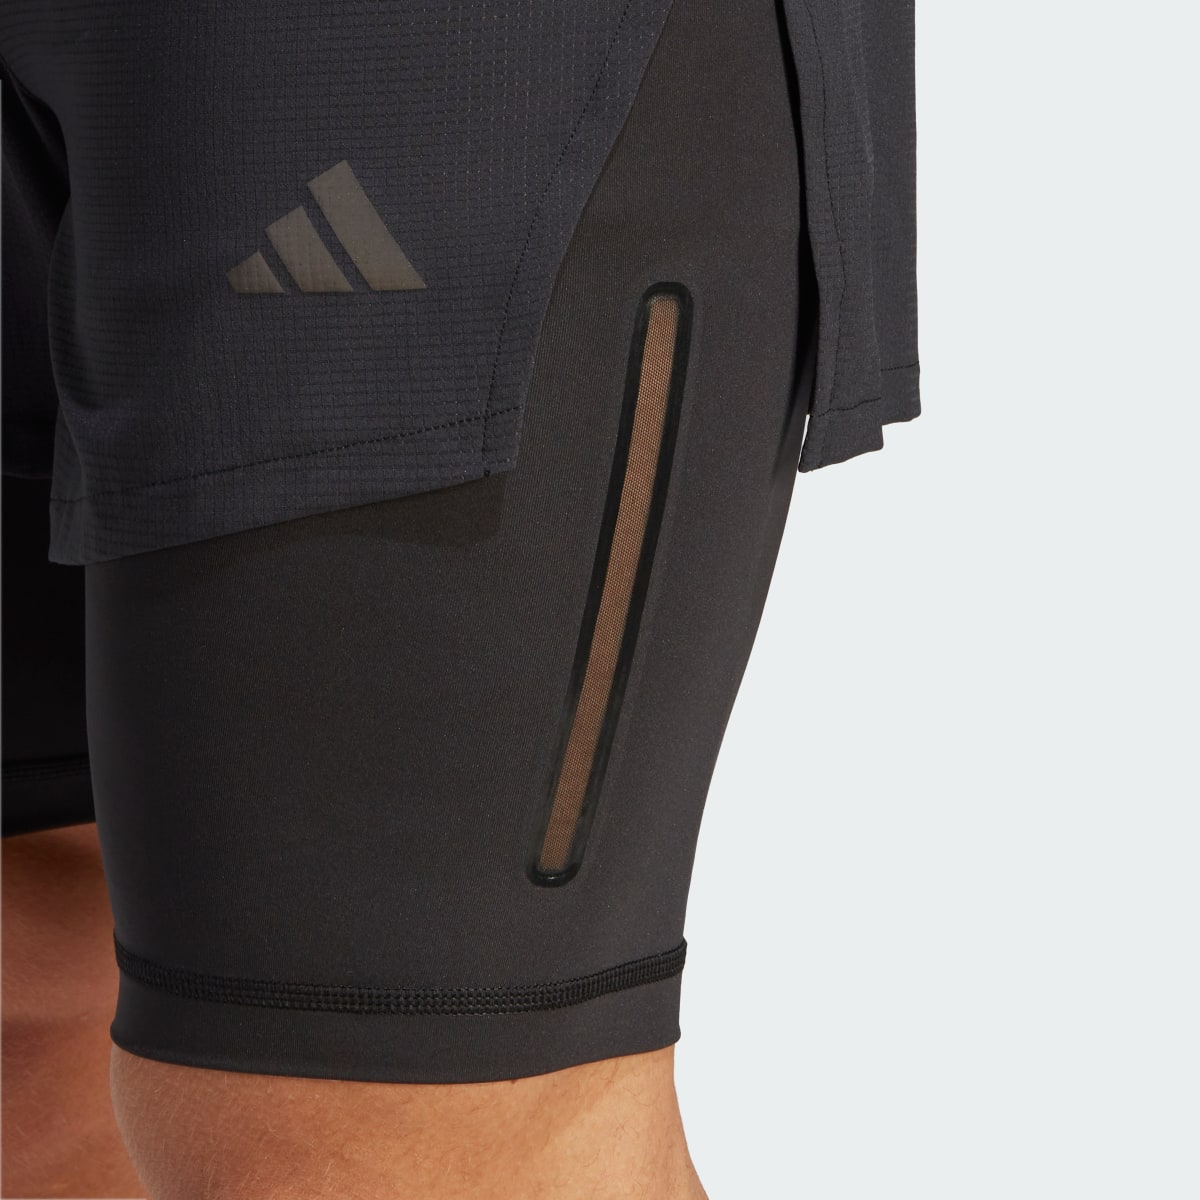 Adidas HEAT.RDY HIIT Elevated Training 2-in-1 Shorts. 5